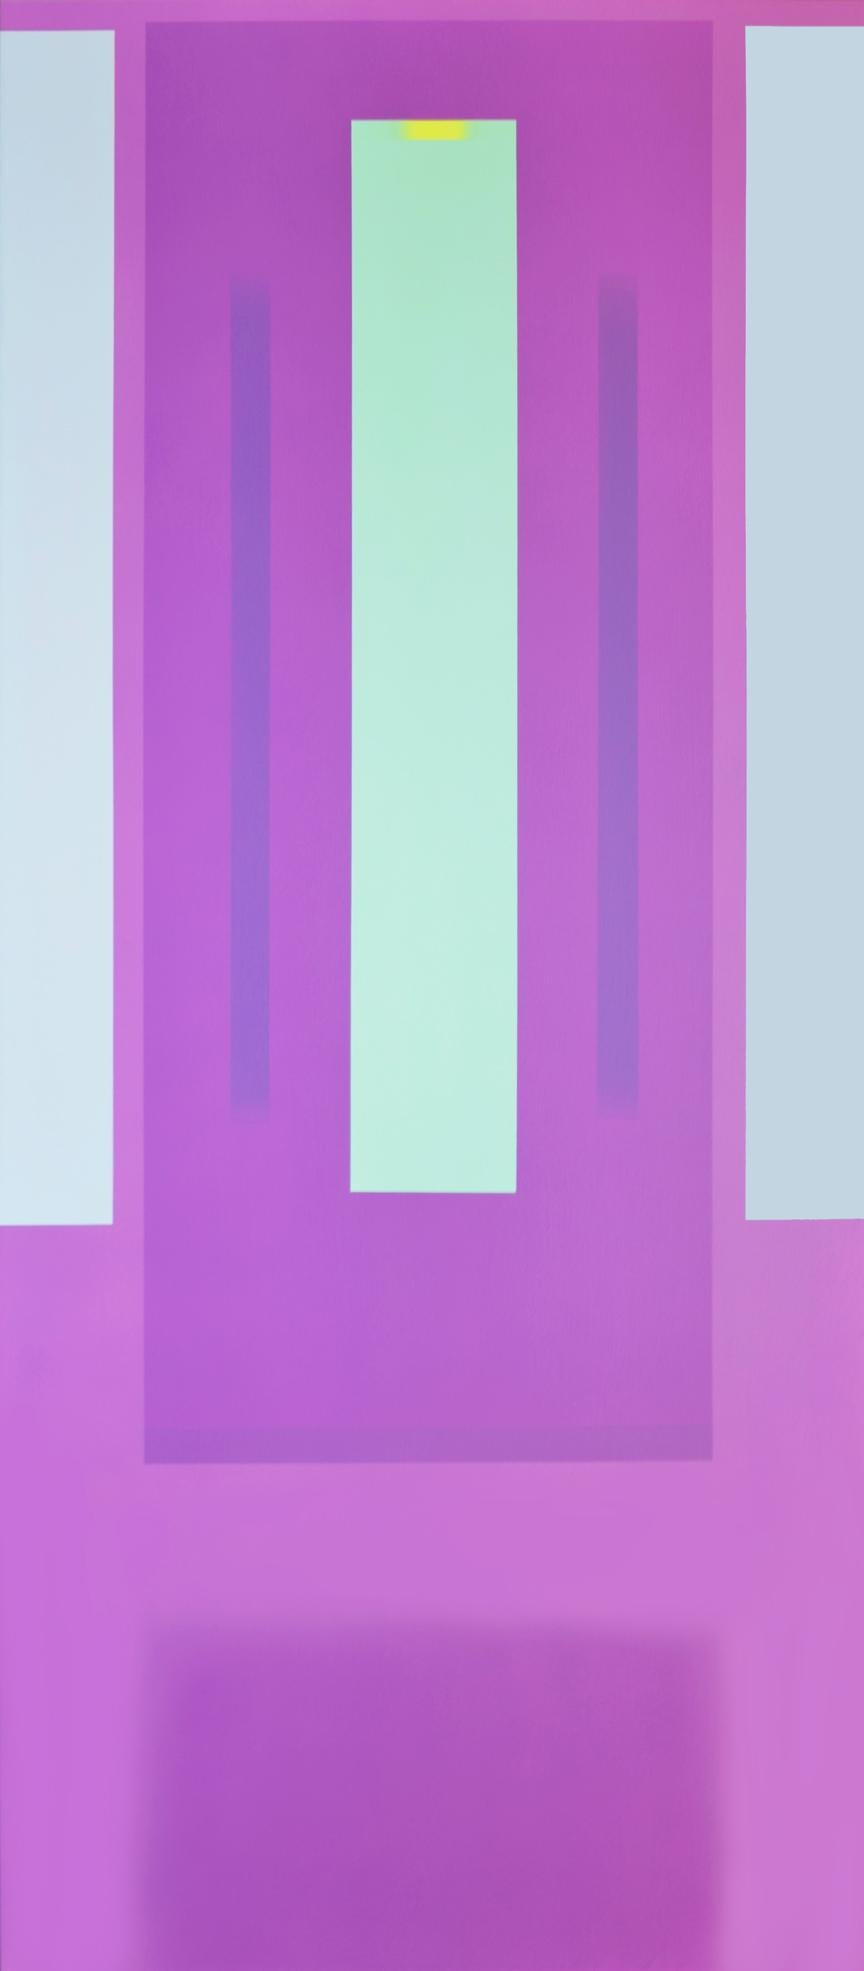 Lucas Blok Abstract Painting - Purple Minimalist Abstract Vertical Color-field Painting - Untitled, 5-1-14